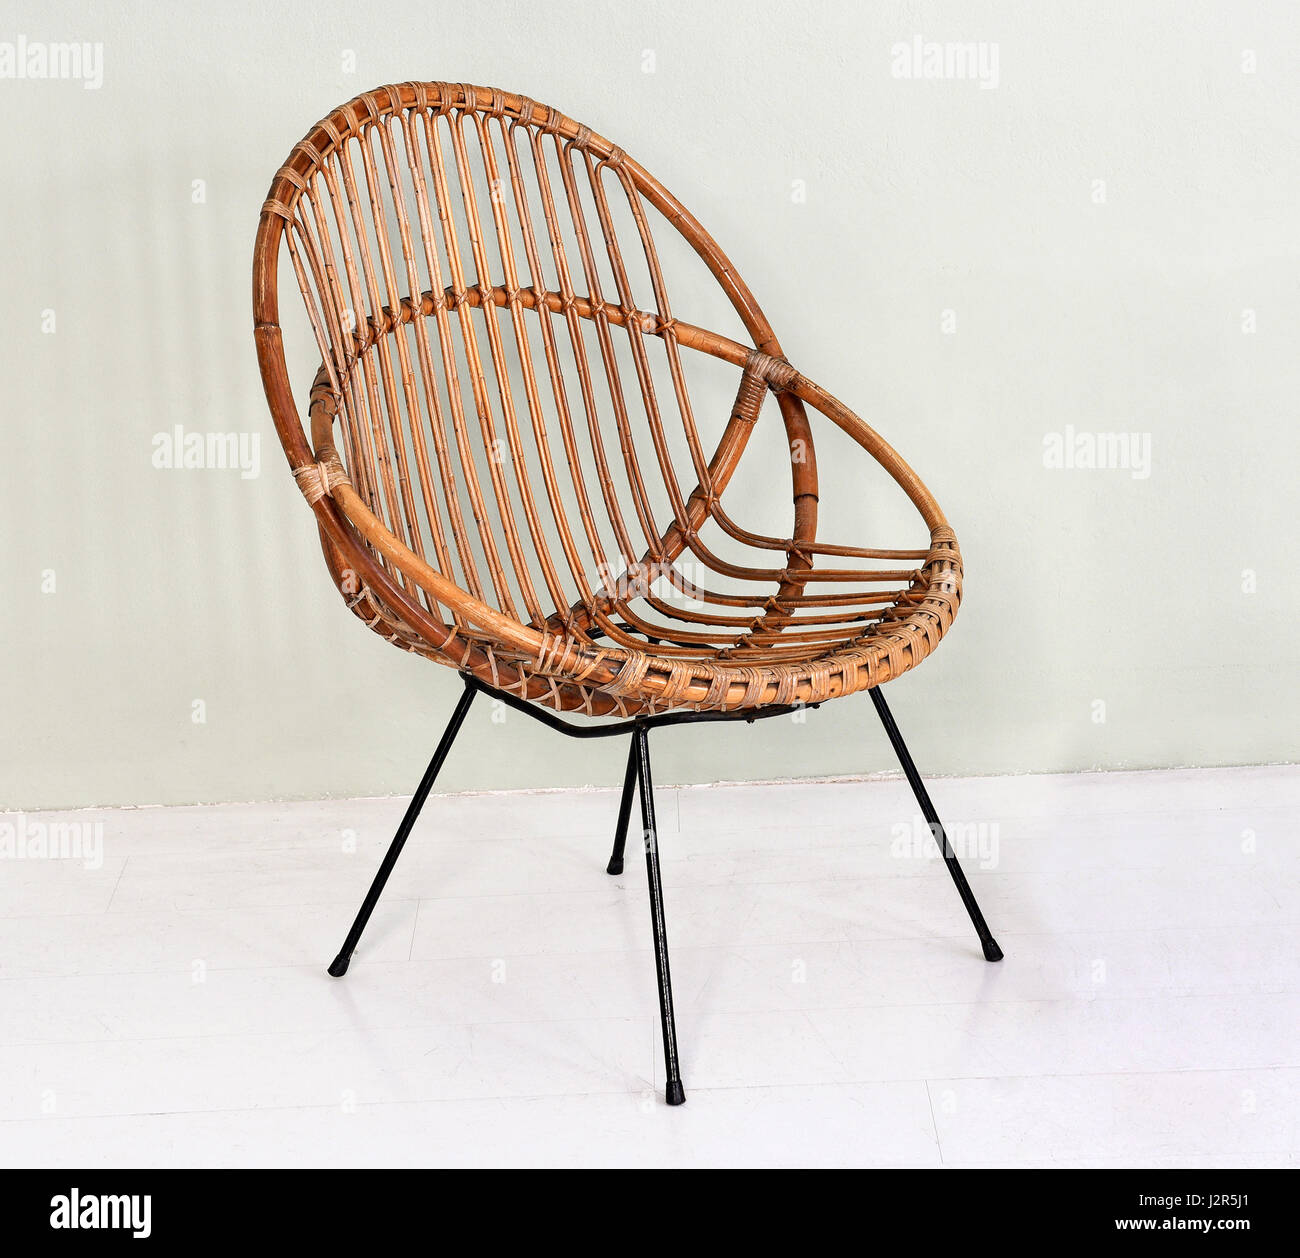 Comfortable round wicker chair with metal legs made with intertwined willow canes in an interior decor and design concept Stock Photo